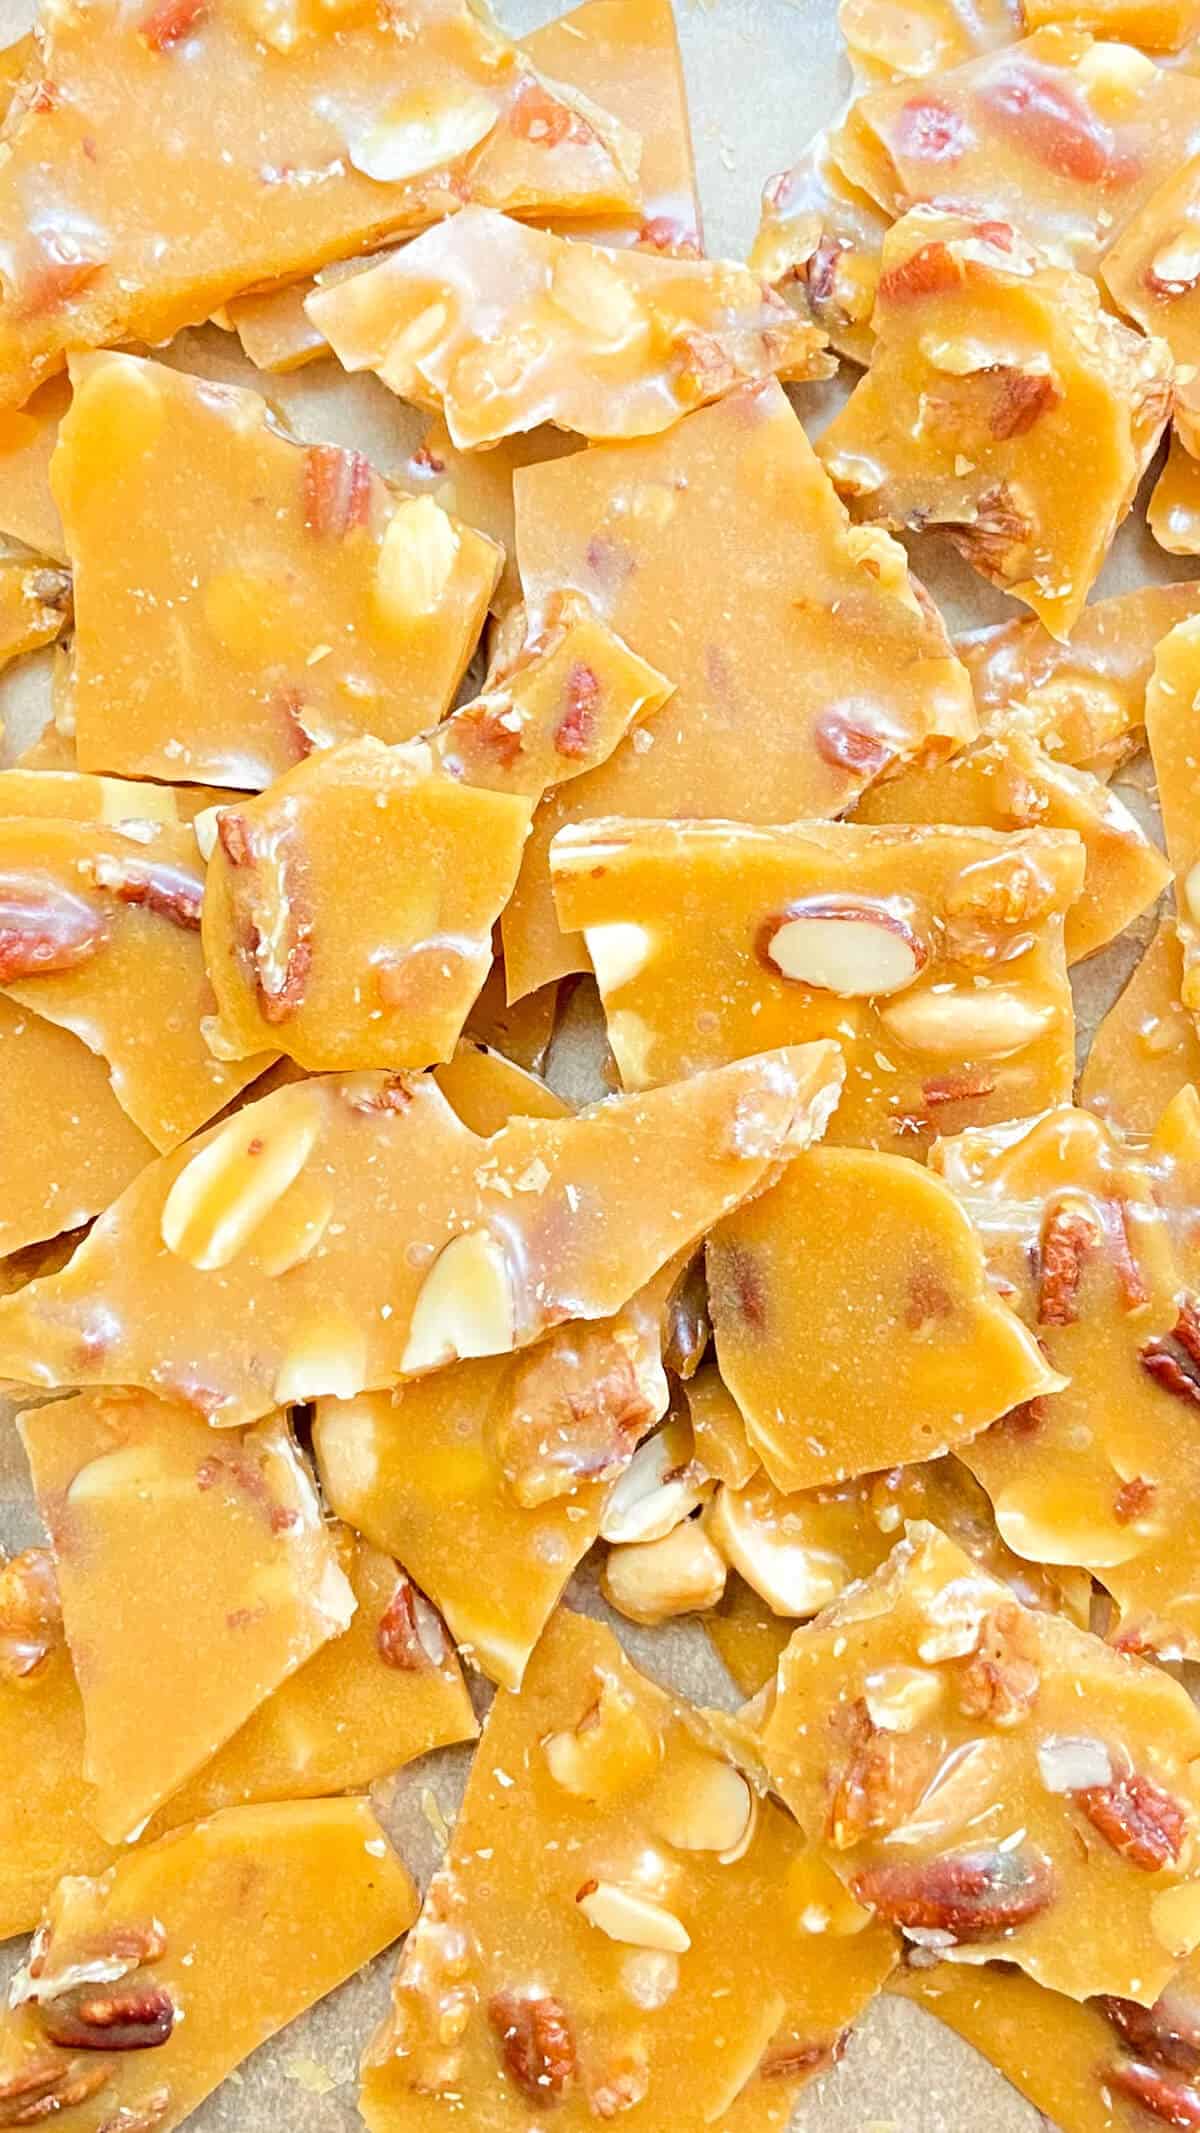 Mixed nuts in pieces of brittle on a countertop.